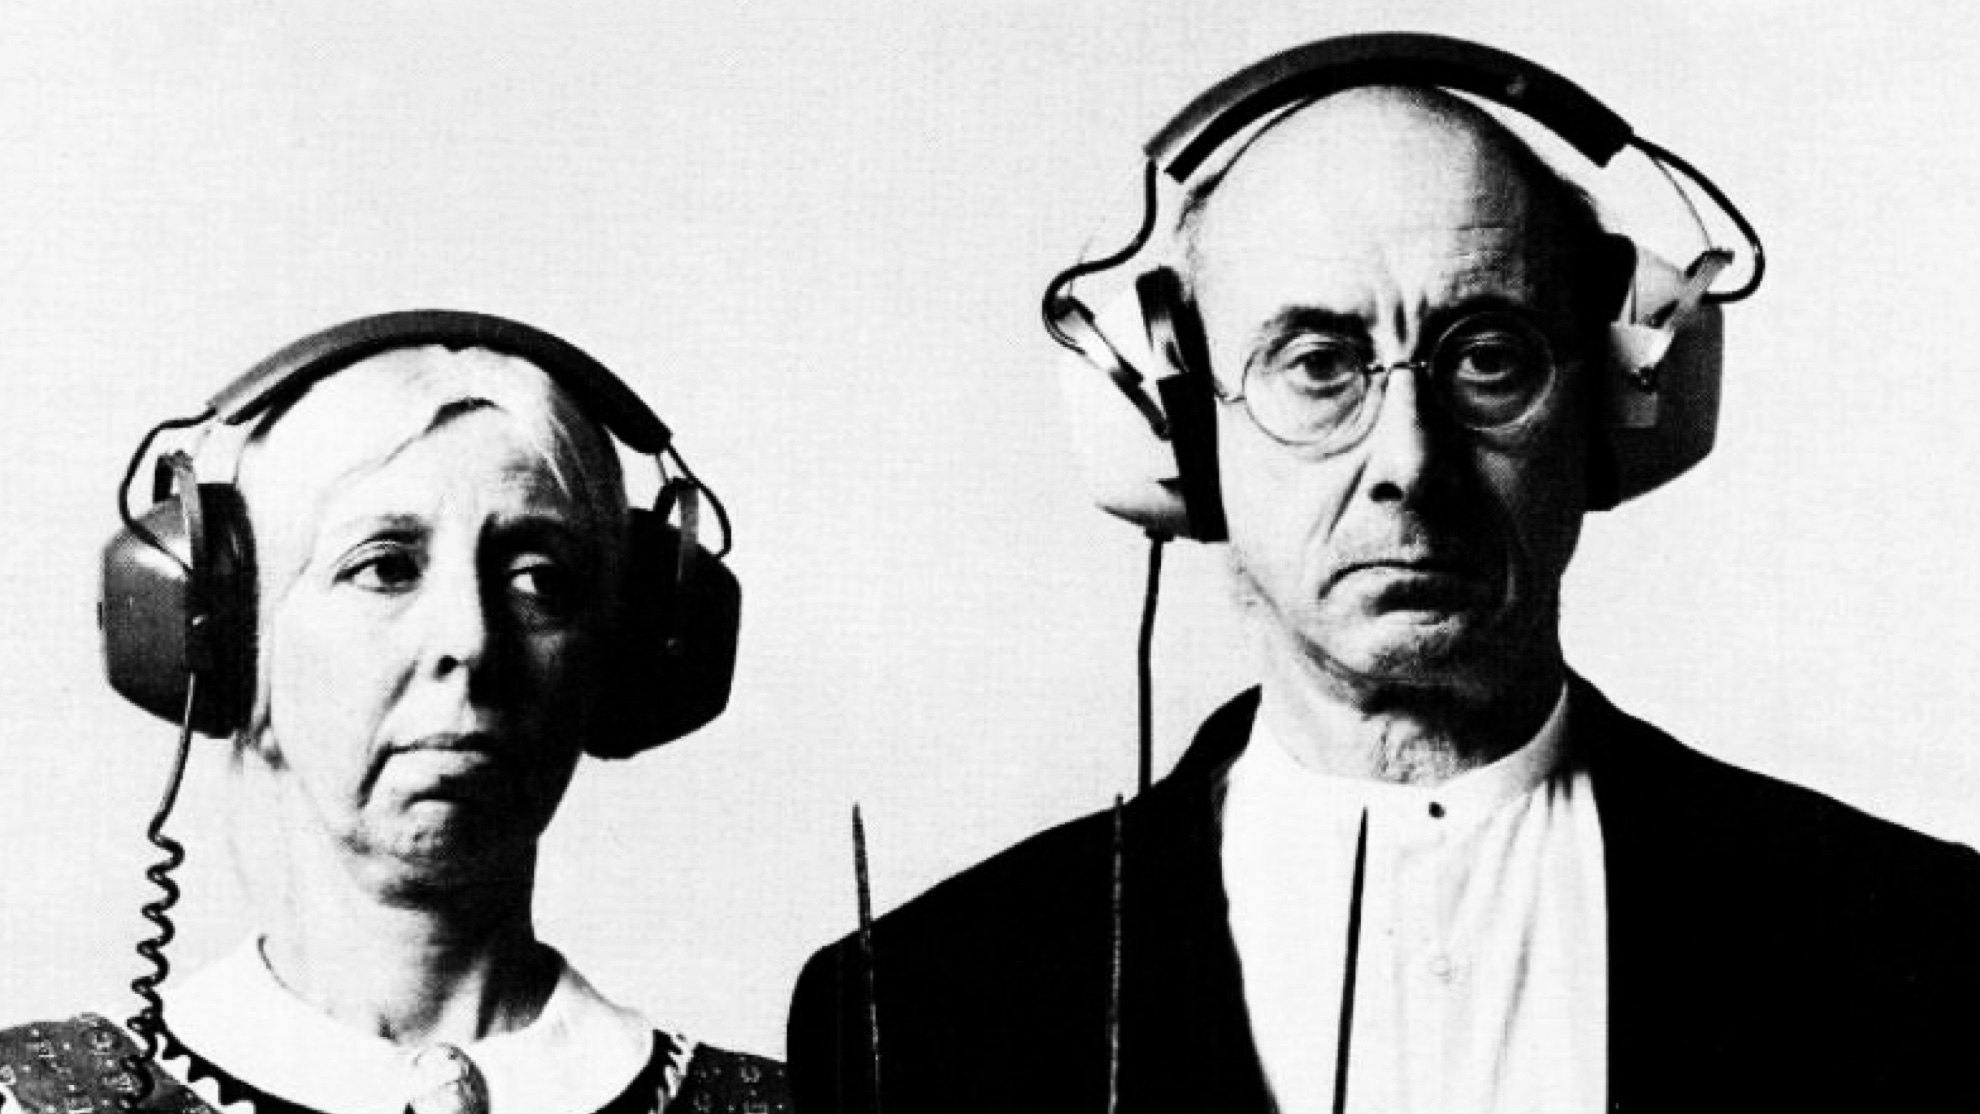 an RCA 197s advertisement showing two people wearing headphones